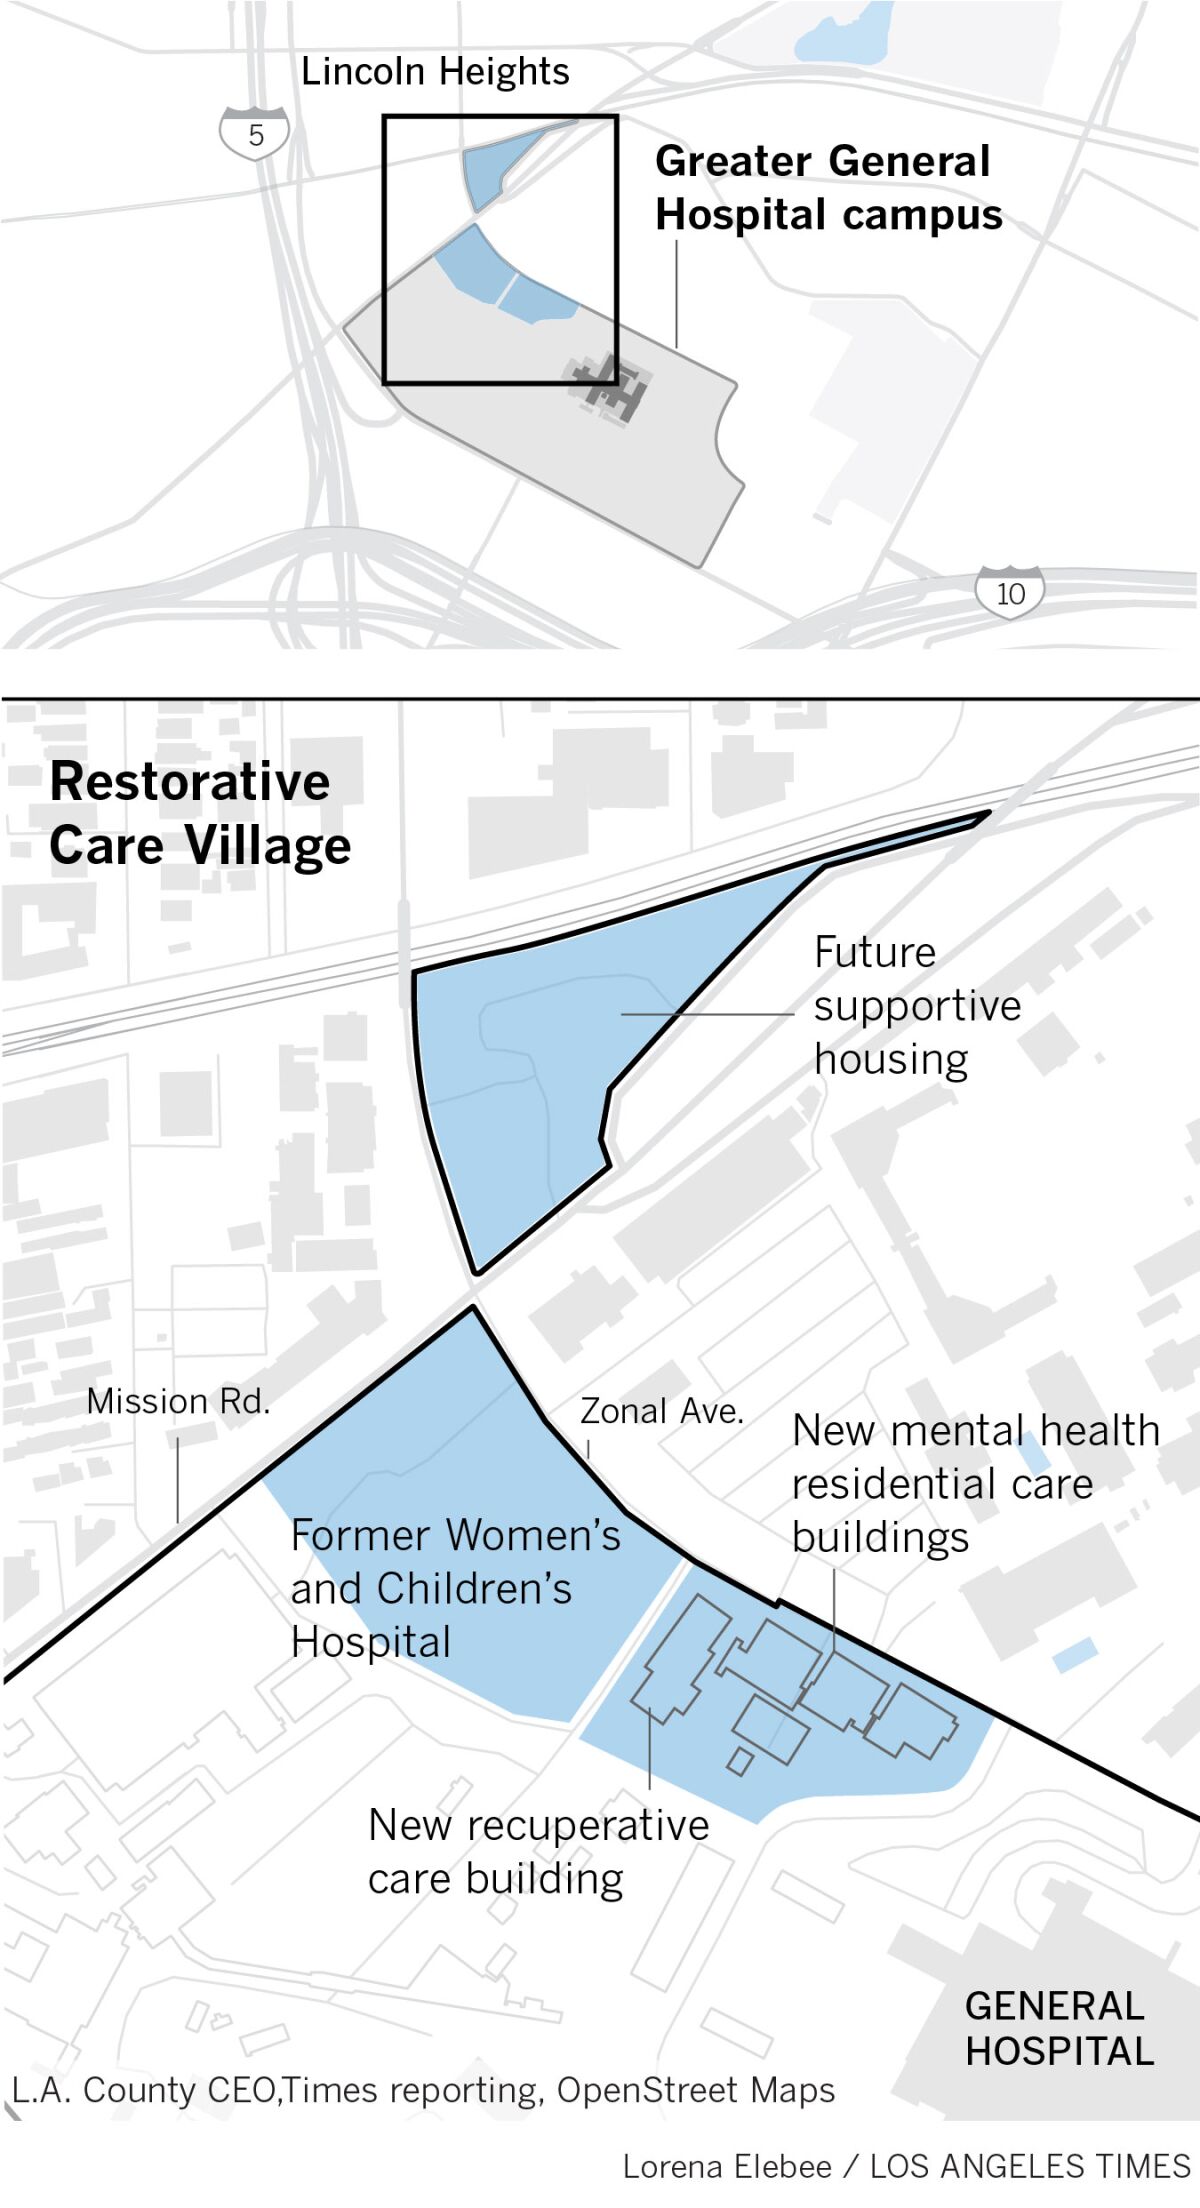 Map showing the Restorative Care Village development area near the historic General Hospital building in Los Angeles.